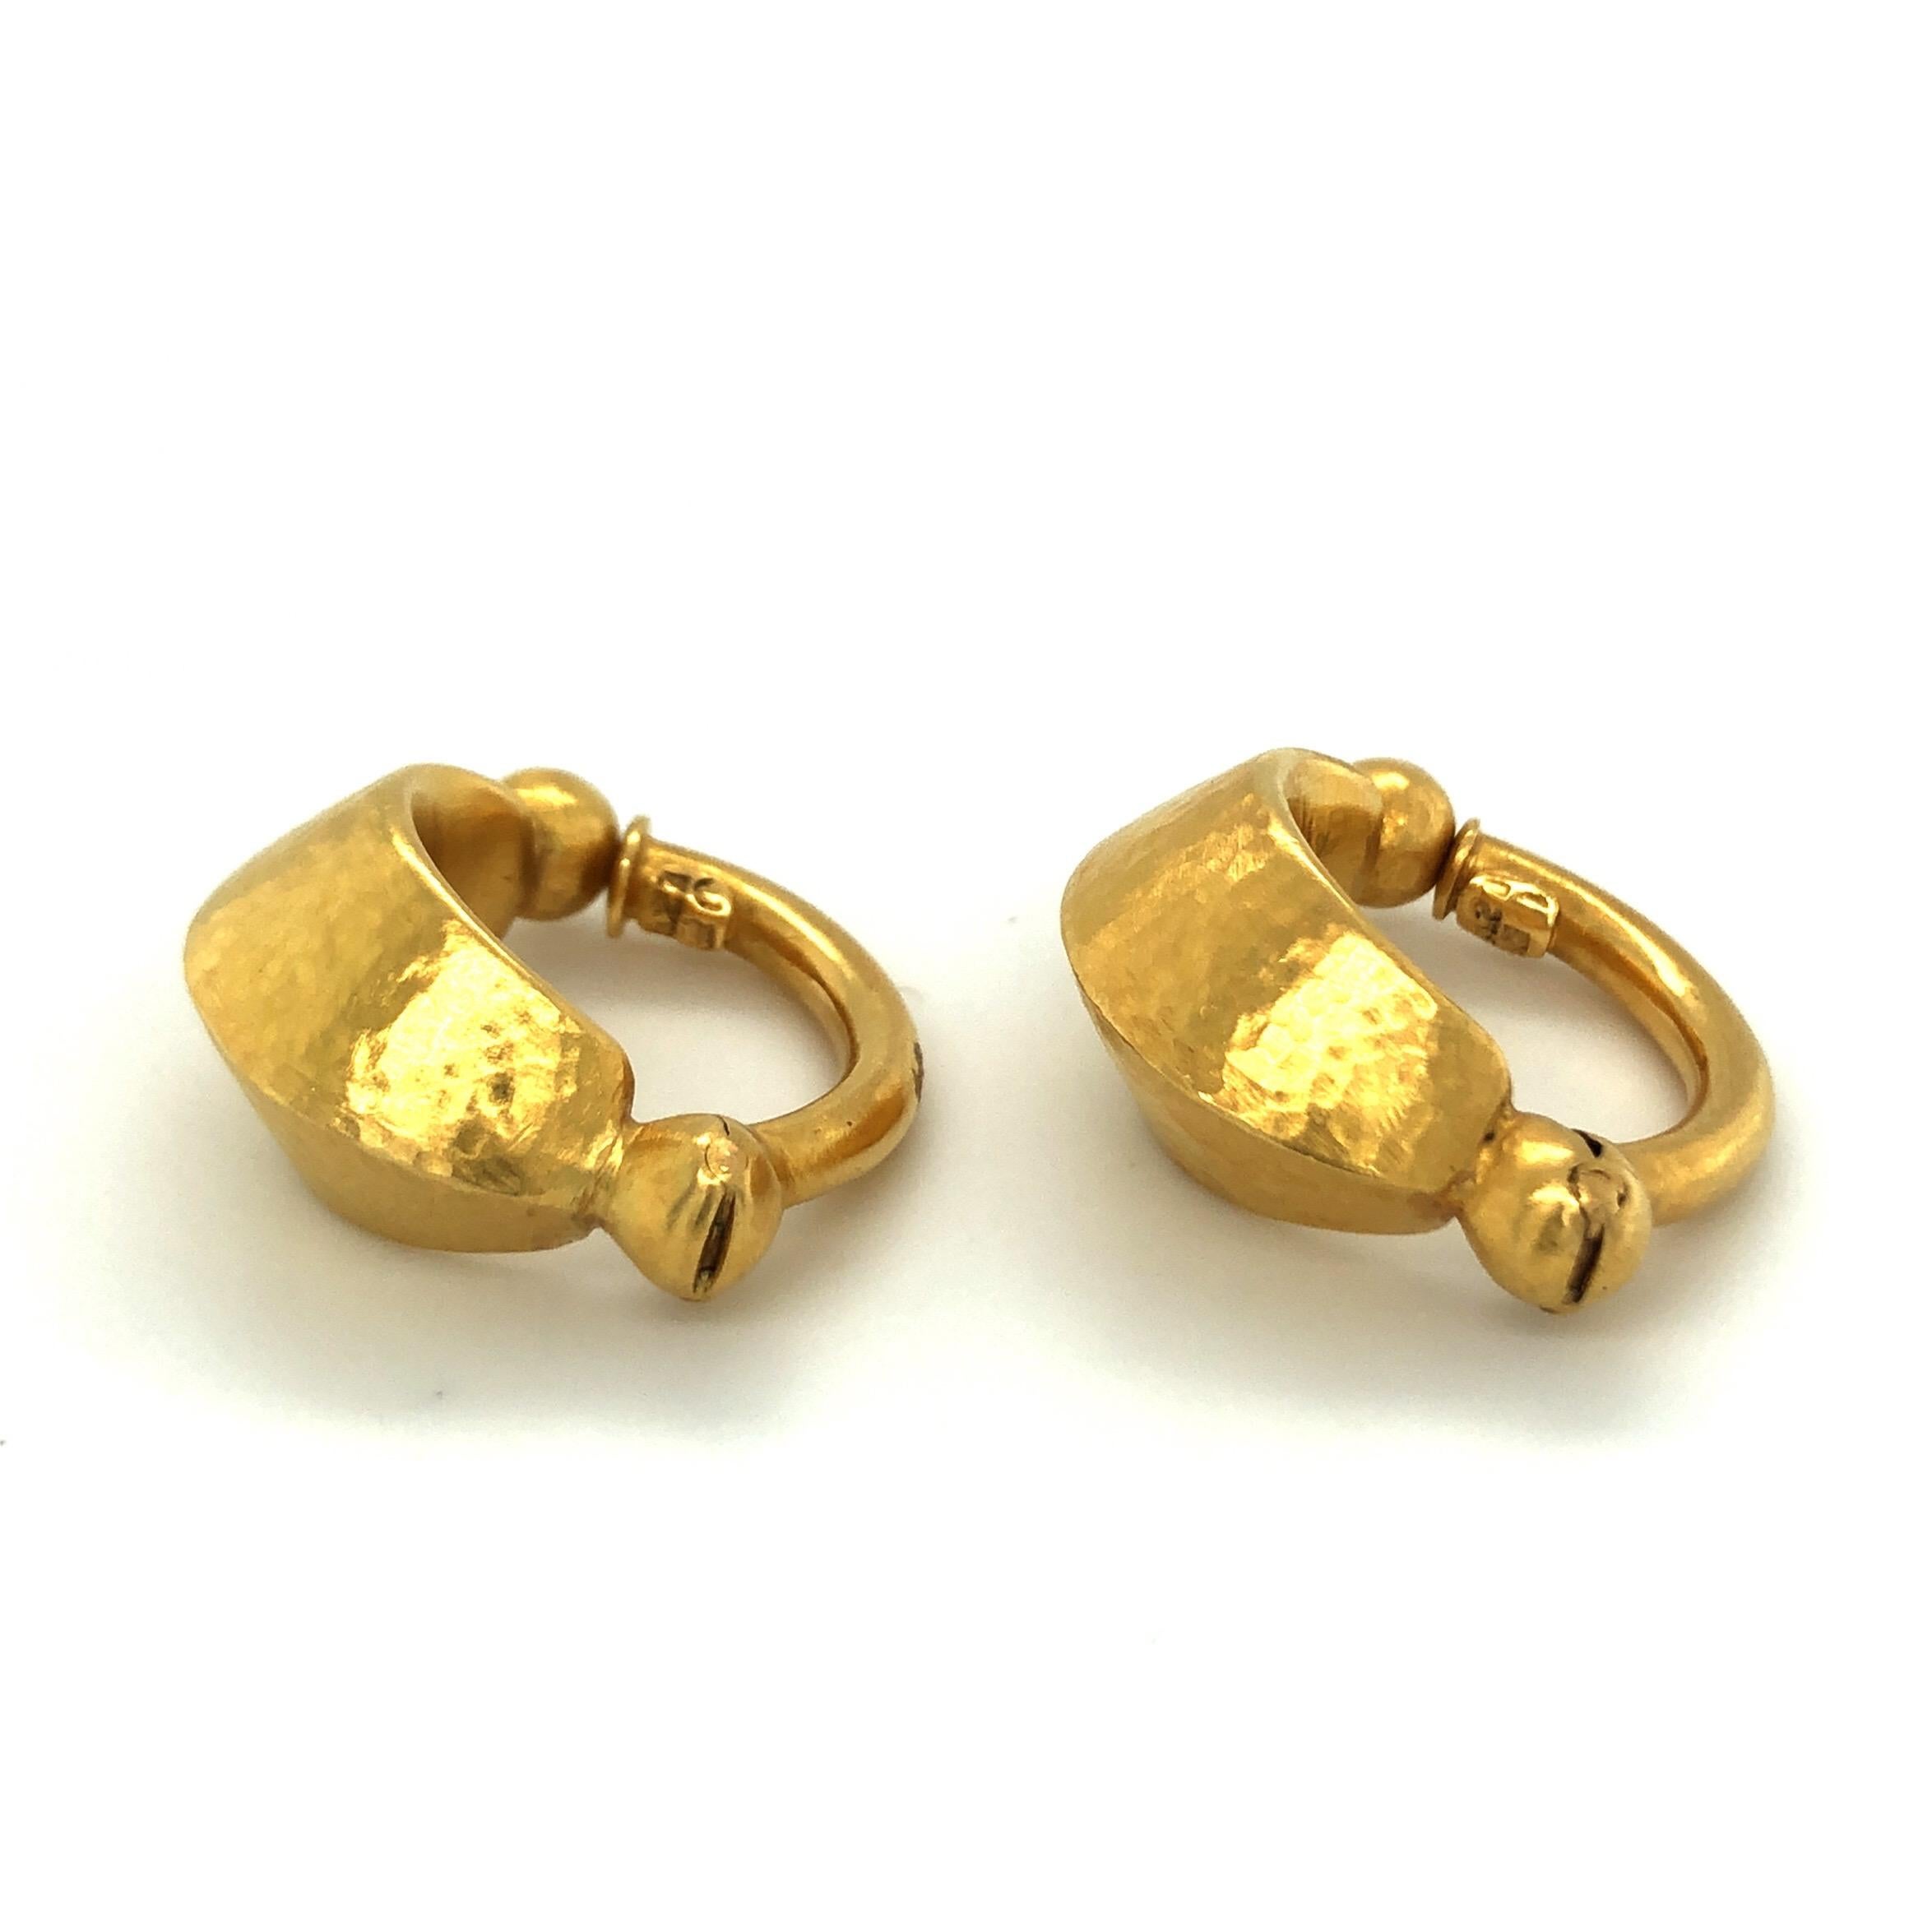 18 karat yellow gold Neolithic hoop earrings by Lalaounis.
Pair of prehistoric style hoop earrings handcrafted in 18 karat yellow hammered gold, each designed as a textured, bevelled and tapered hoop with spherical terminals. Suitable for unpierced